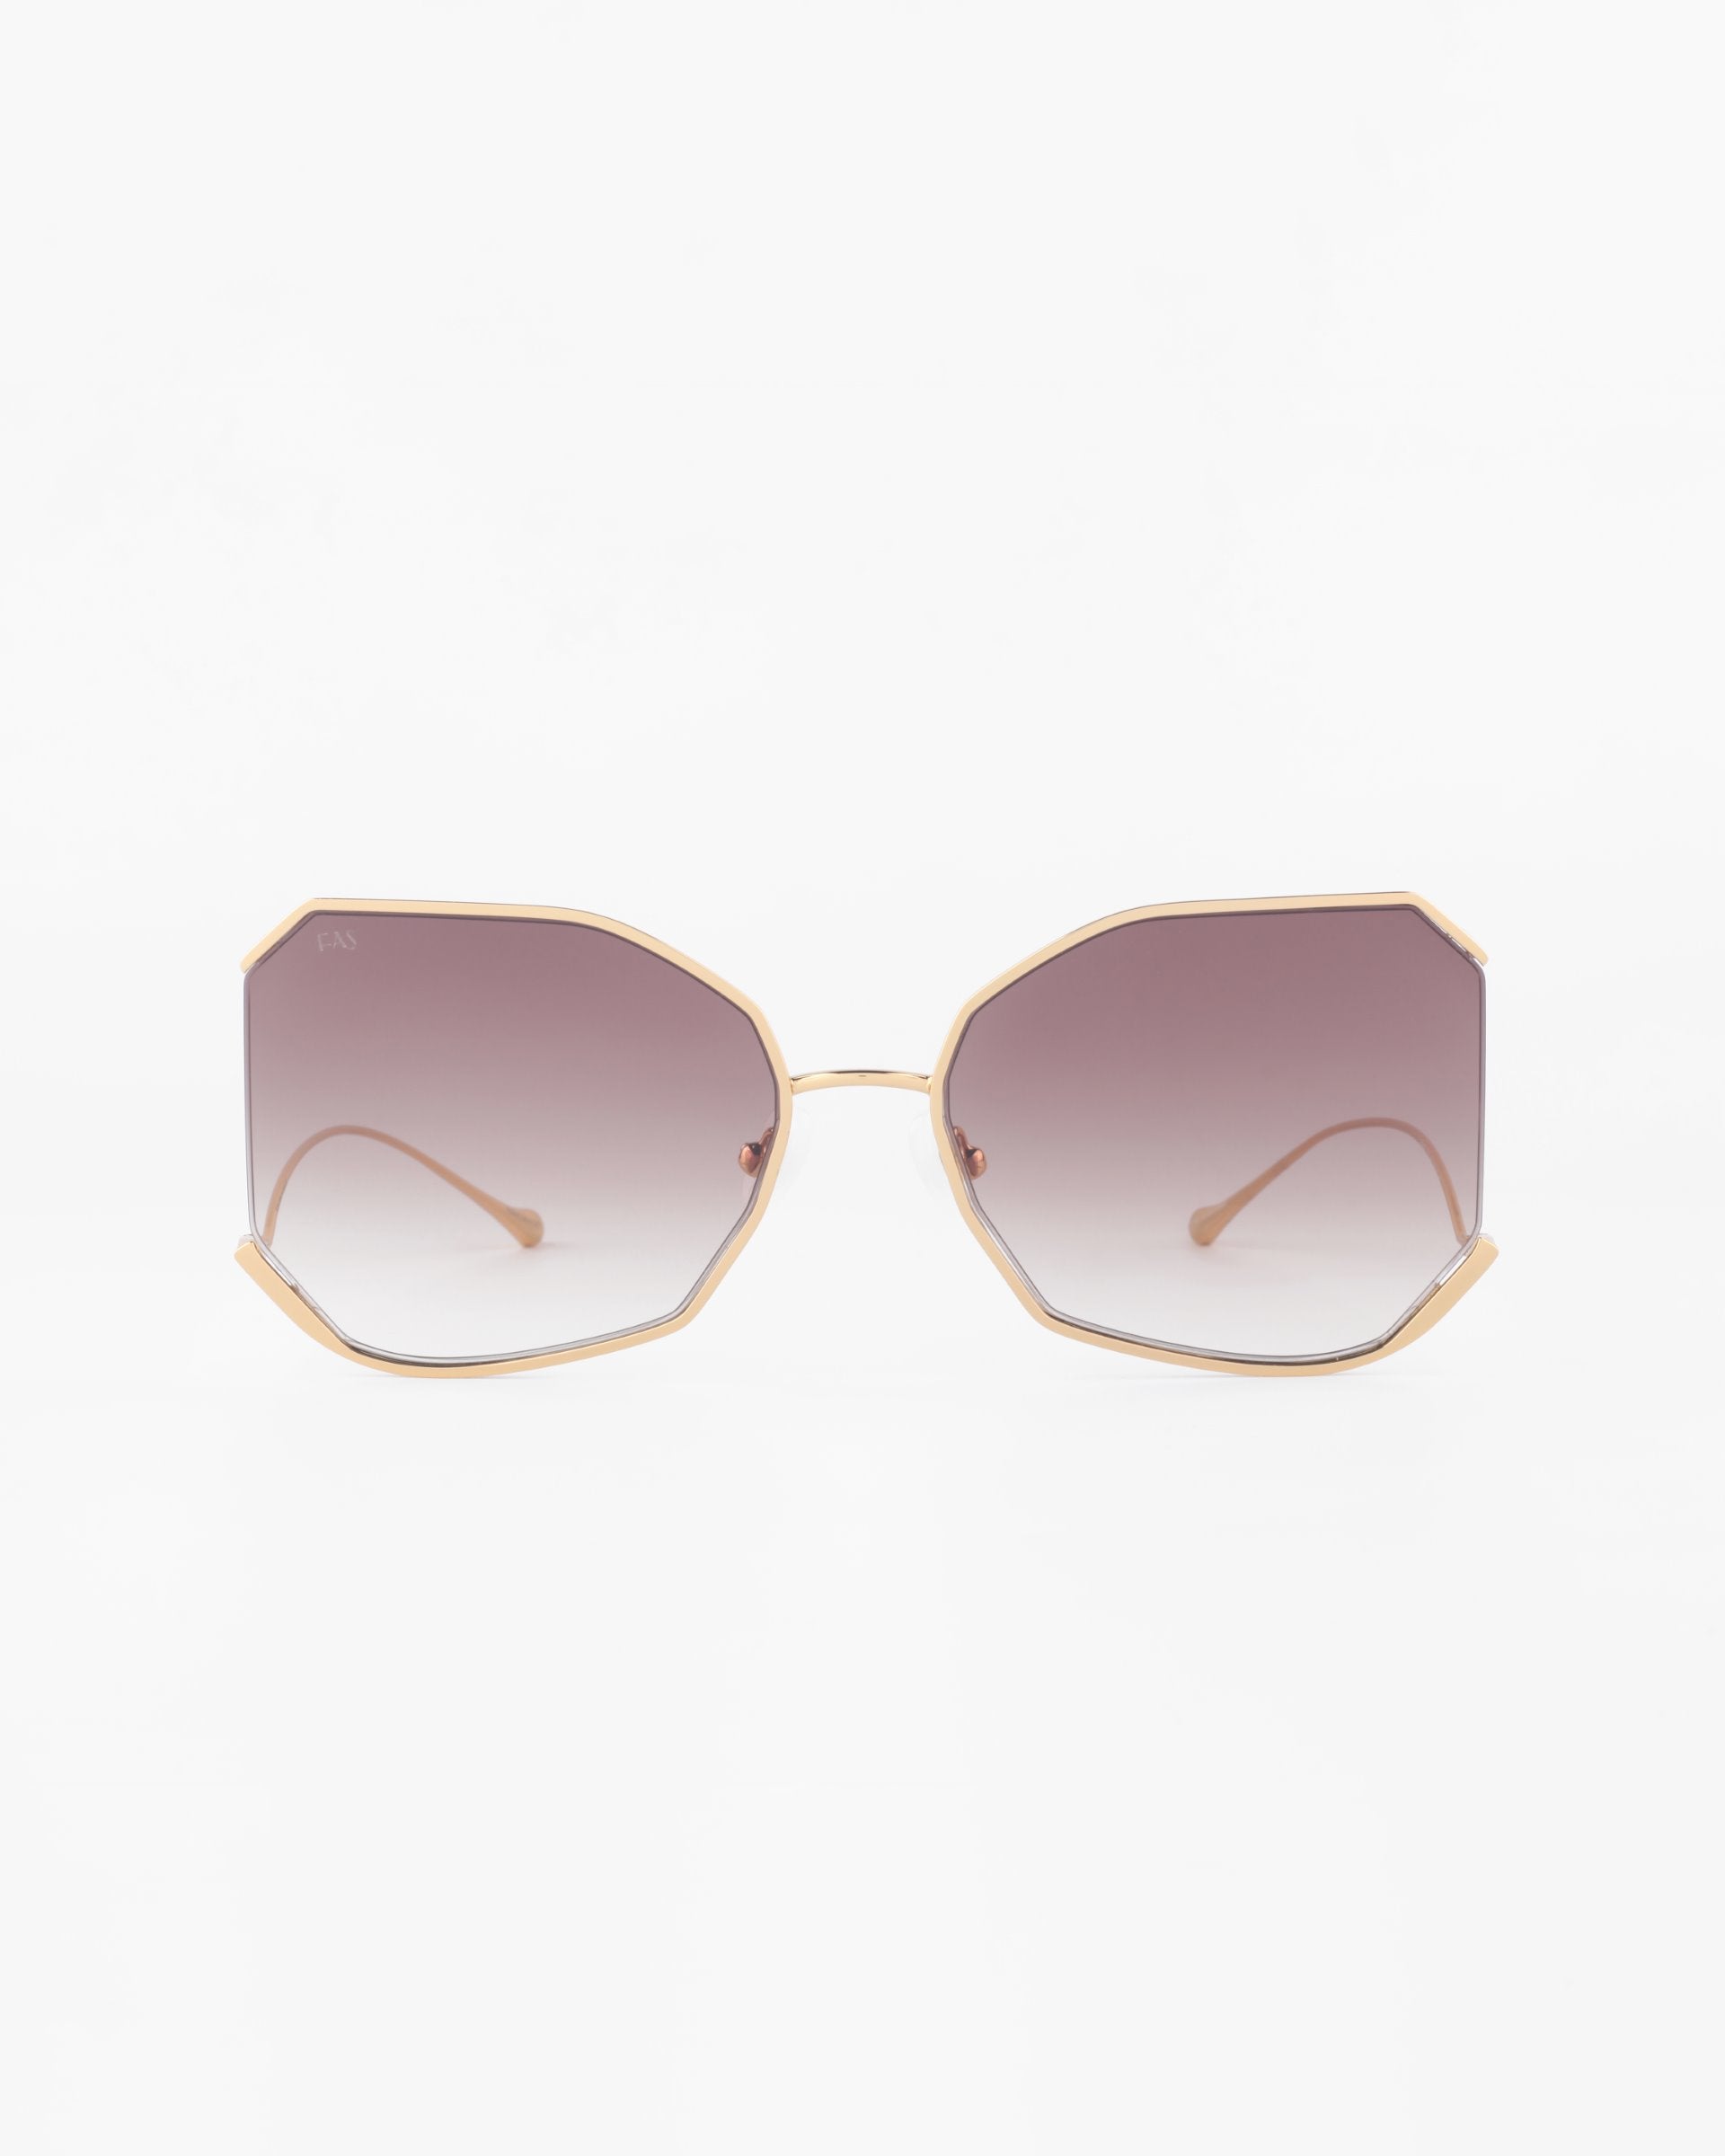 Front view of a pair of For Art&#39;s Sake® Painter sunglasses with gradient lenses and a geometric, angular frame in gold-plated stainless steel. The ultra-lightweight Nylon lenses transition from a dark tint at the top to a lighter tint at the bottom, offering 100% UVA &amp; UVB protection. The temple arms are thin with matching gold accents.